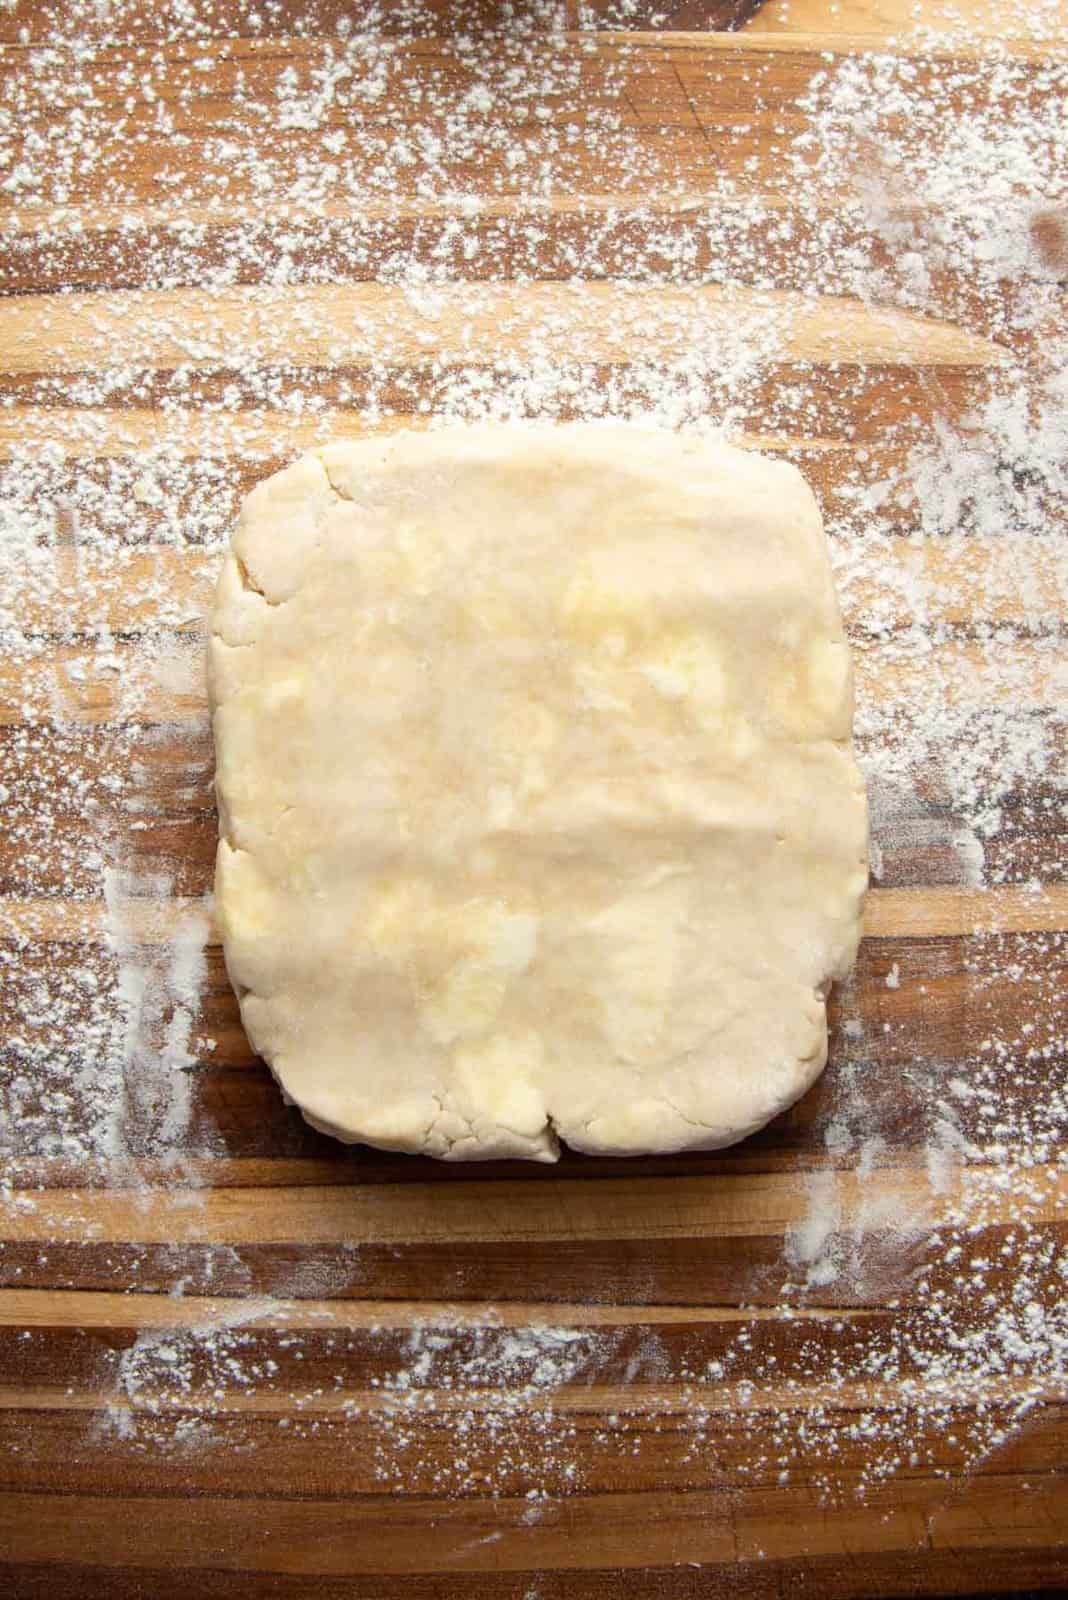 A cold disc of pie dough with pats of butter visible, on a floured surface.